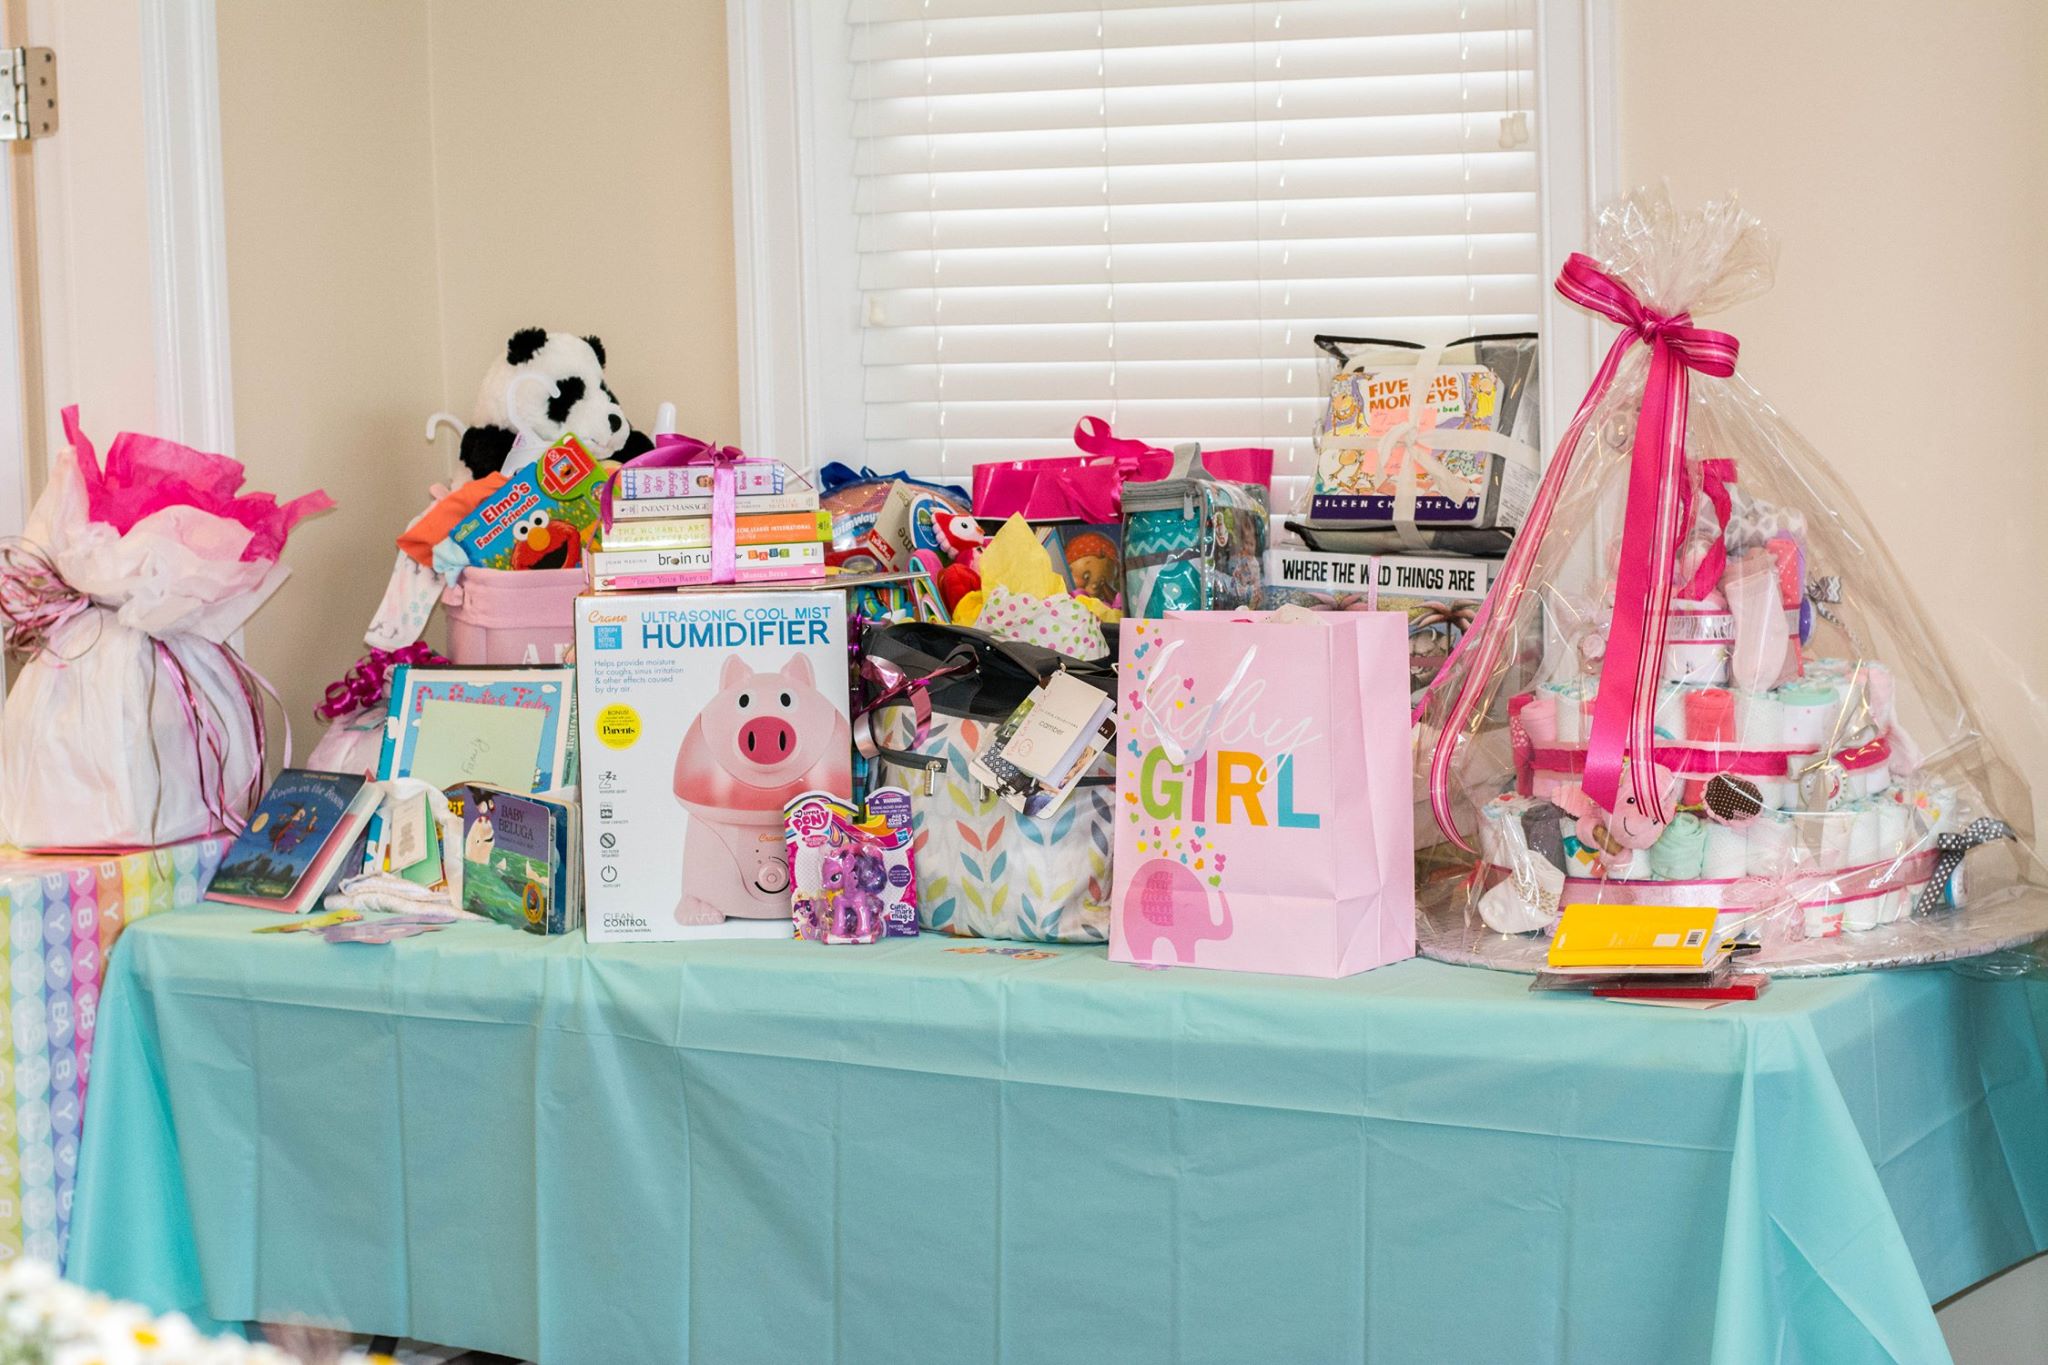 Baby Shower Gifts on Display